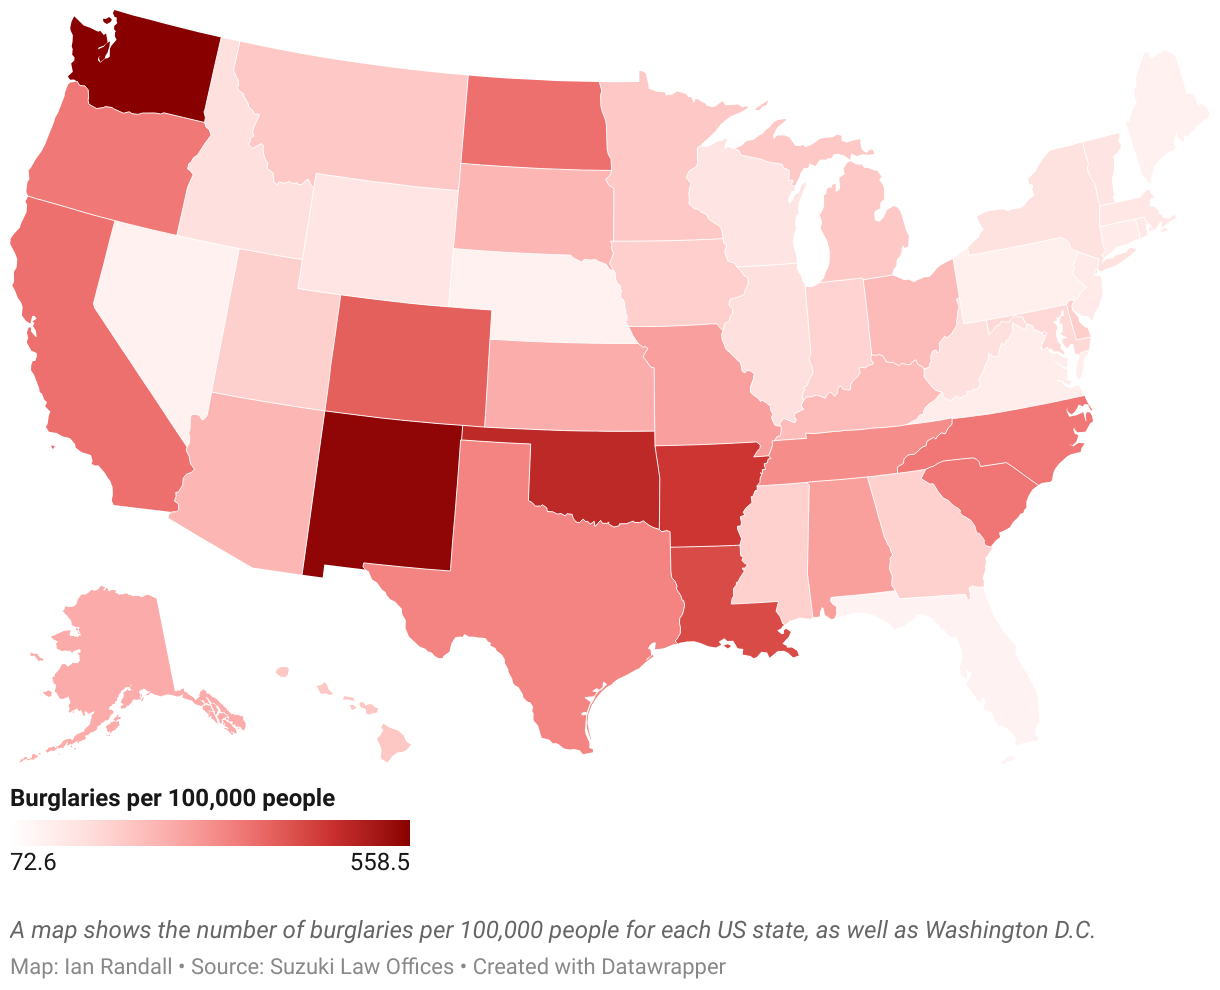 A map shows the number of burglaries per 100,000 people for each US state.